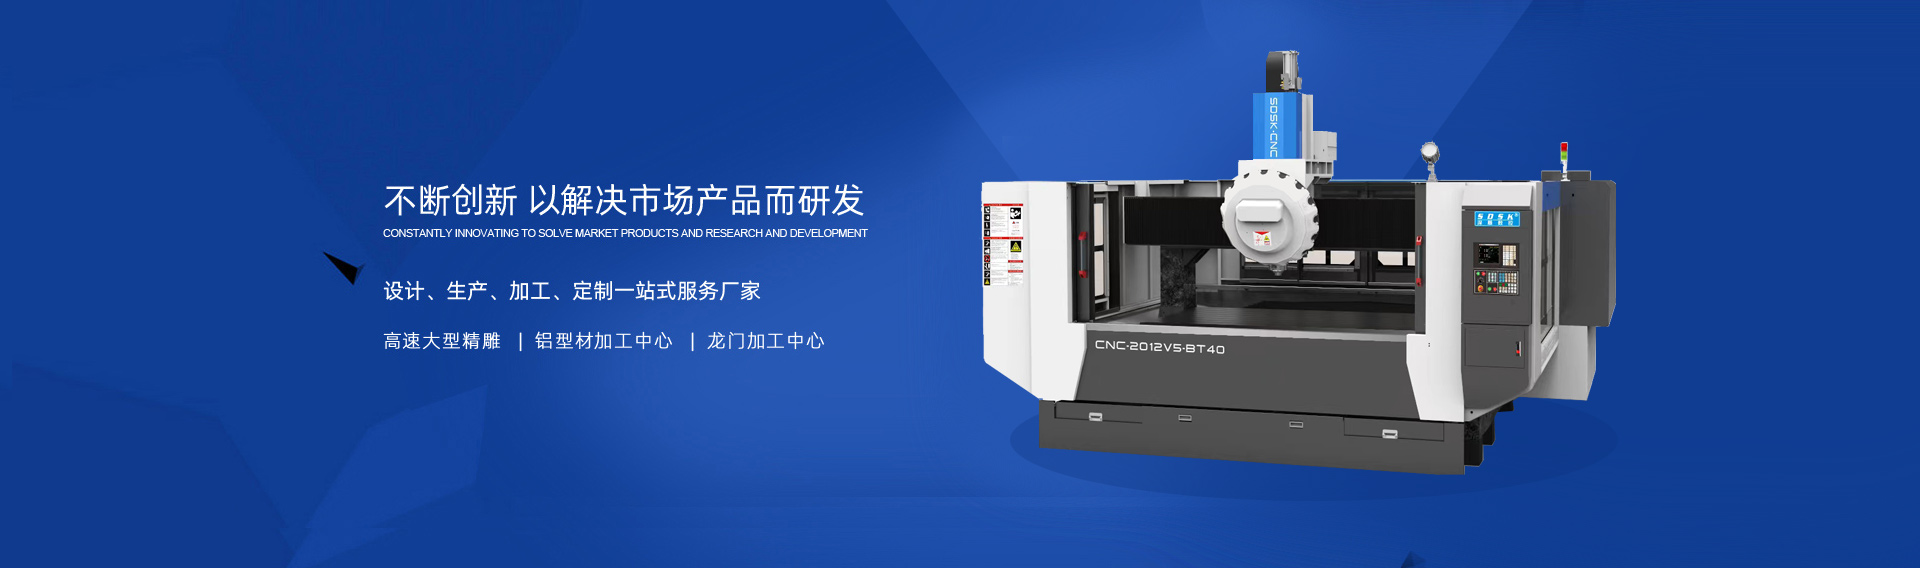 What are CNC precision machining equipment available? What should I pay attention to when making a purchase- Shenzhen Jingdiao CNC Equipment